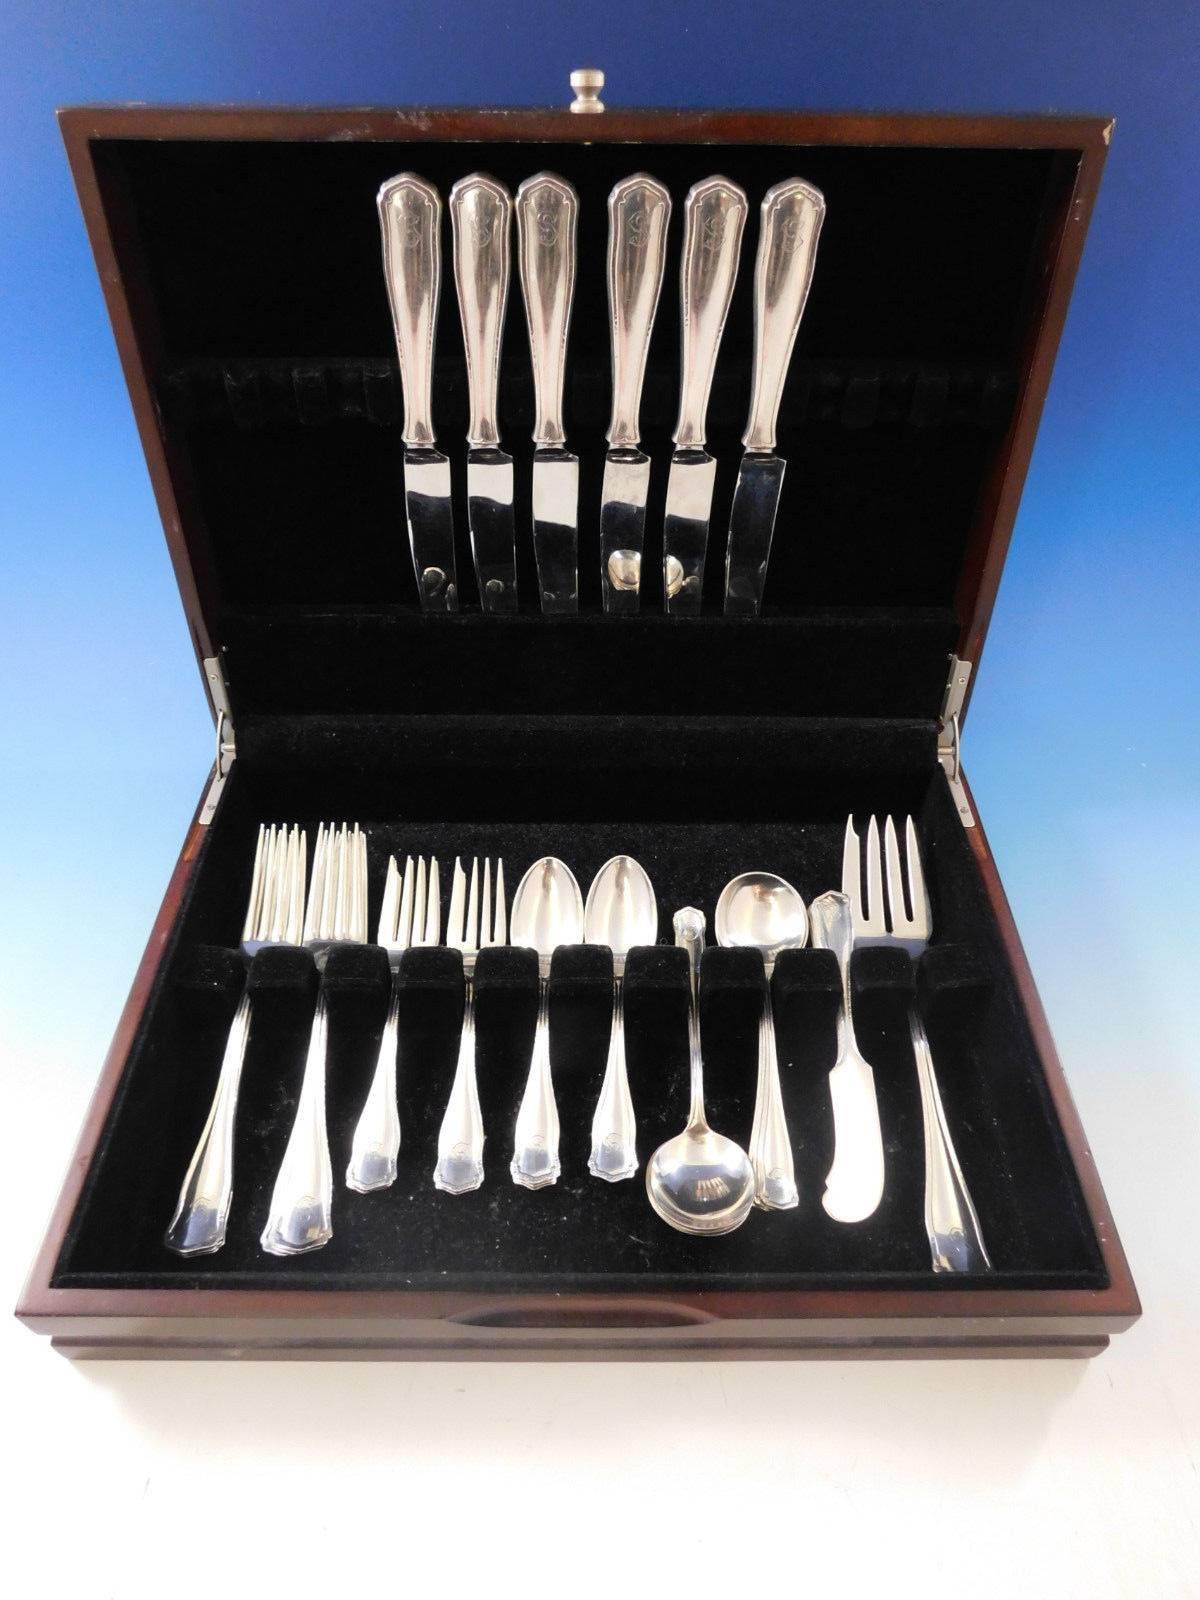 Dolores by Shreve sterling silver Dinner size flatware set - 37 pieces. Great starter set! This Arts & Crafts pattern was introduced in the year 1909 and features a unique raised border. This set includes:

Six dinner size knives, 9 3/4